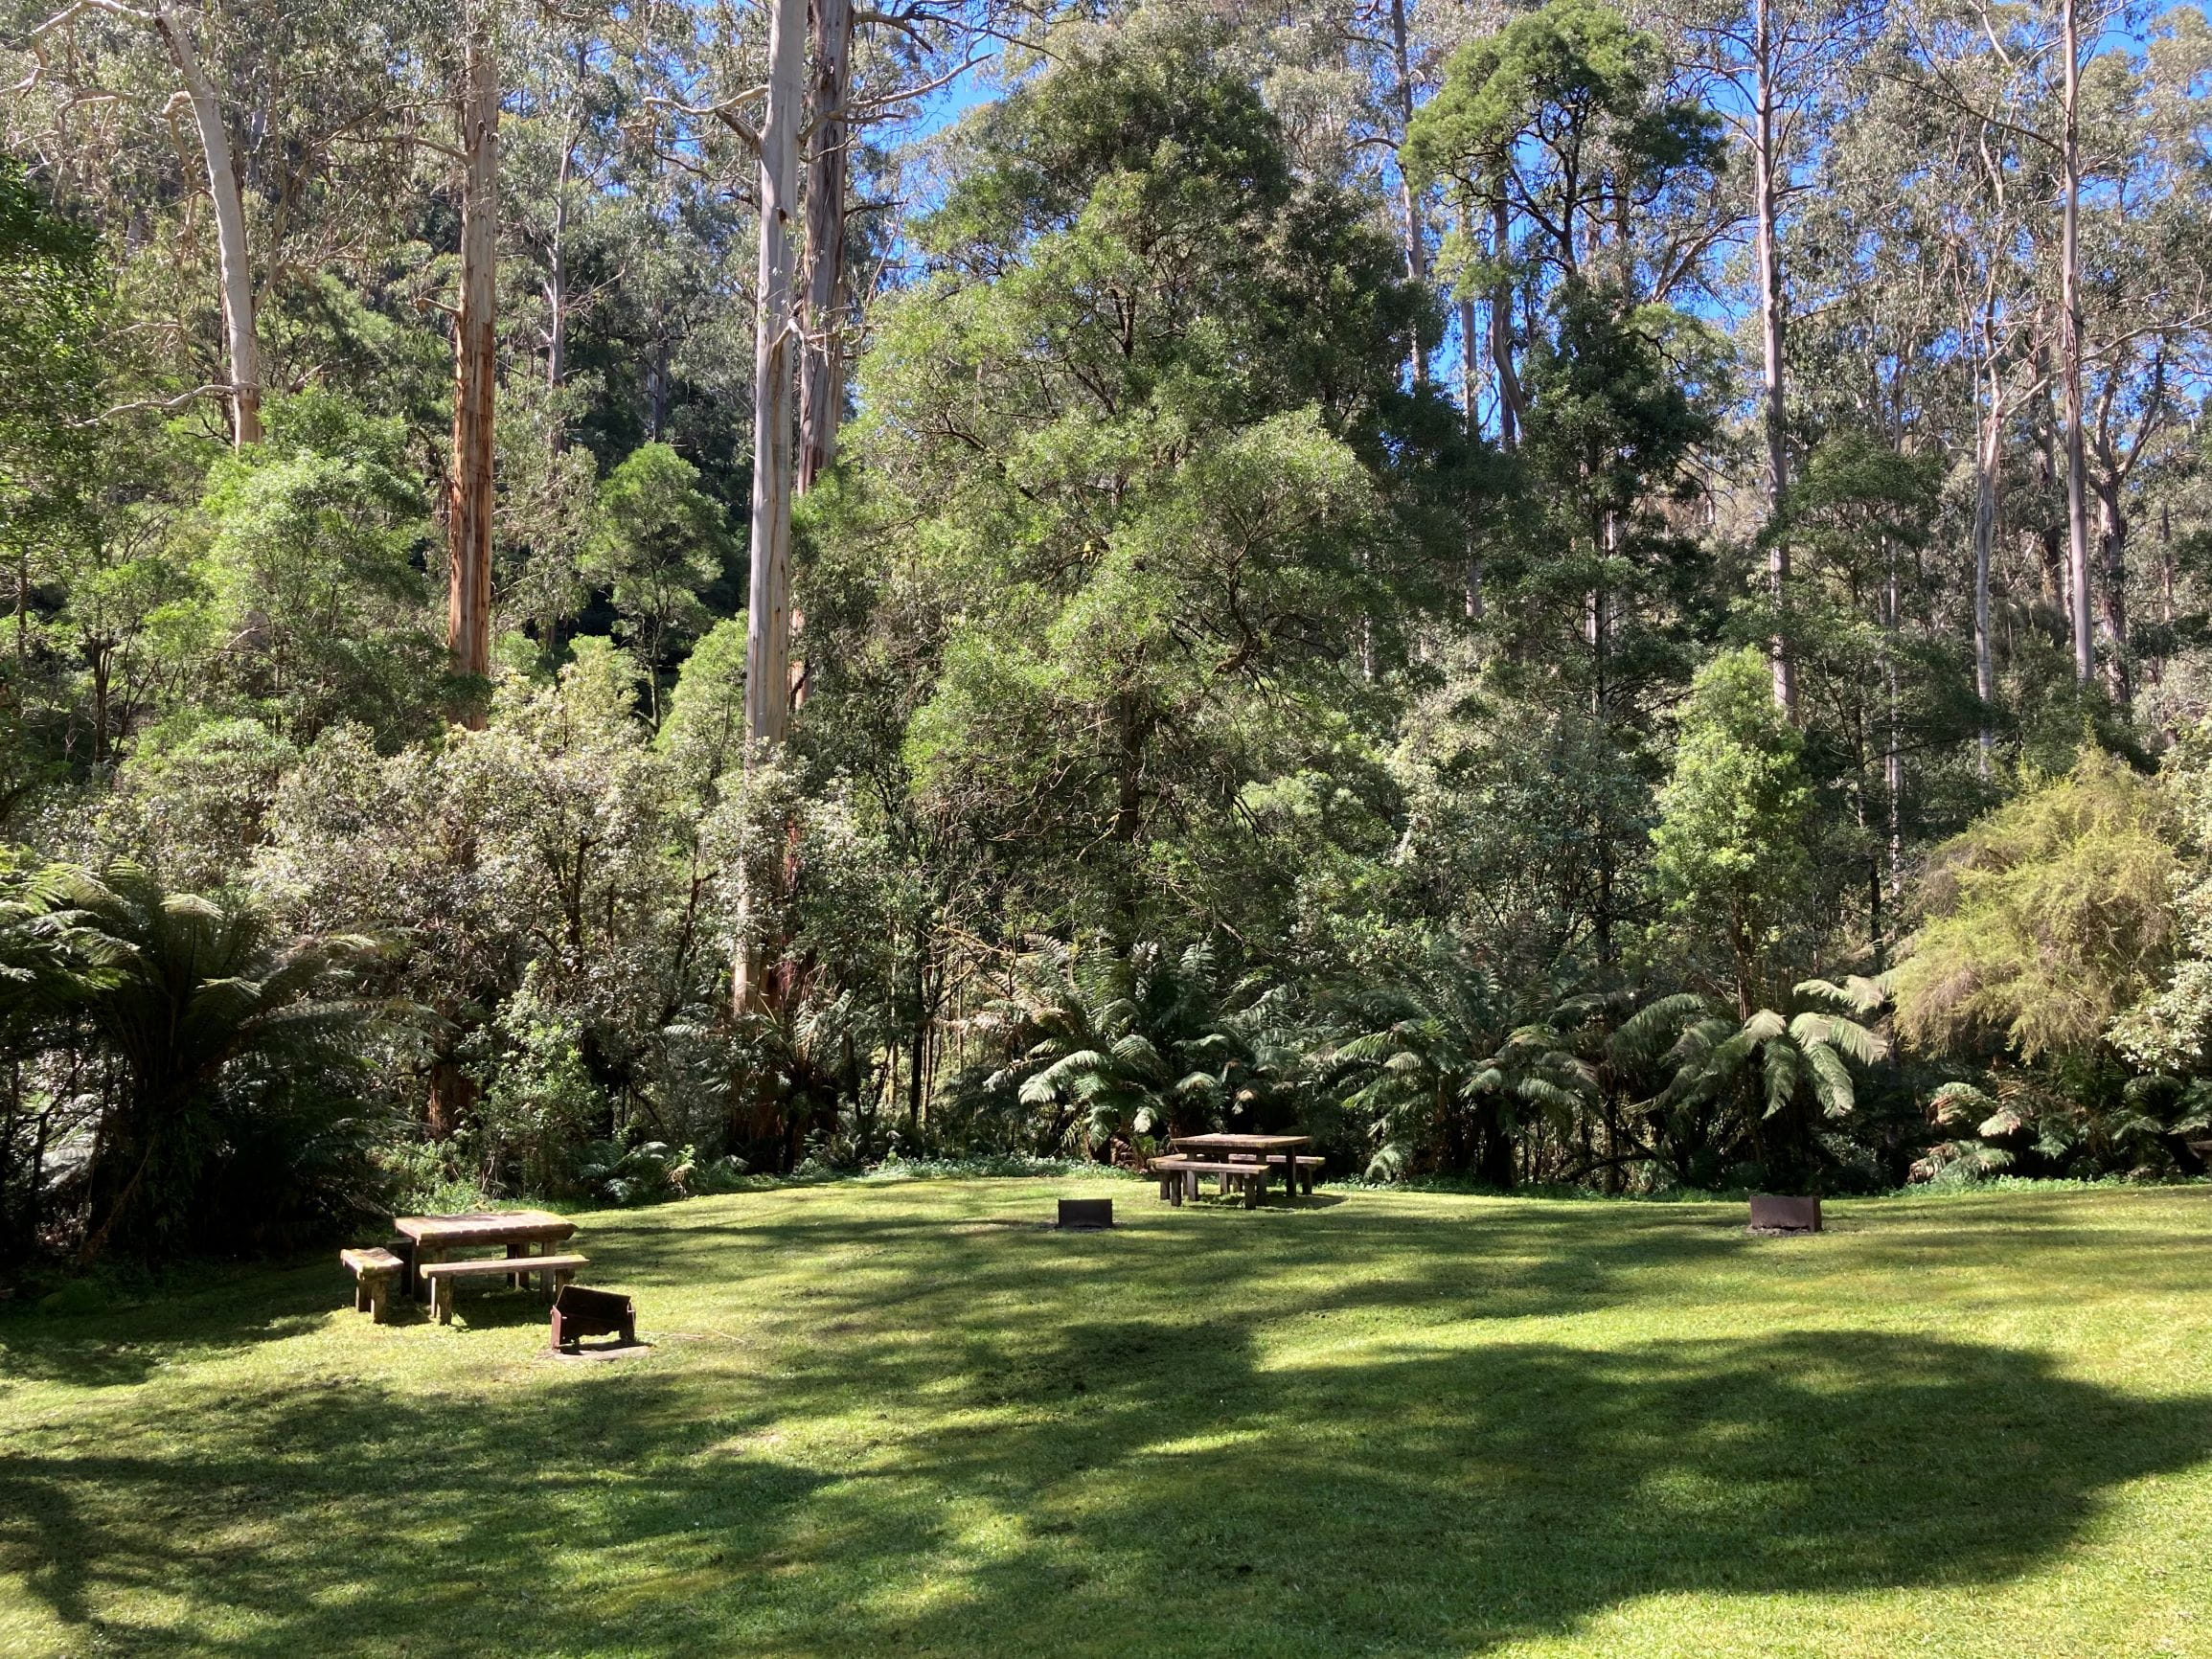 Green grassy picnic area with picnic tables and tall trees in background